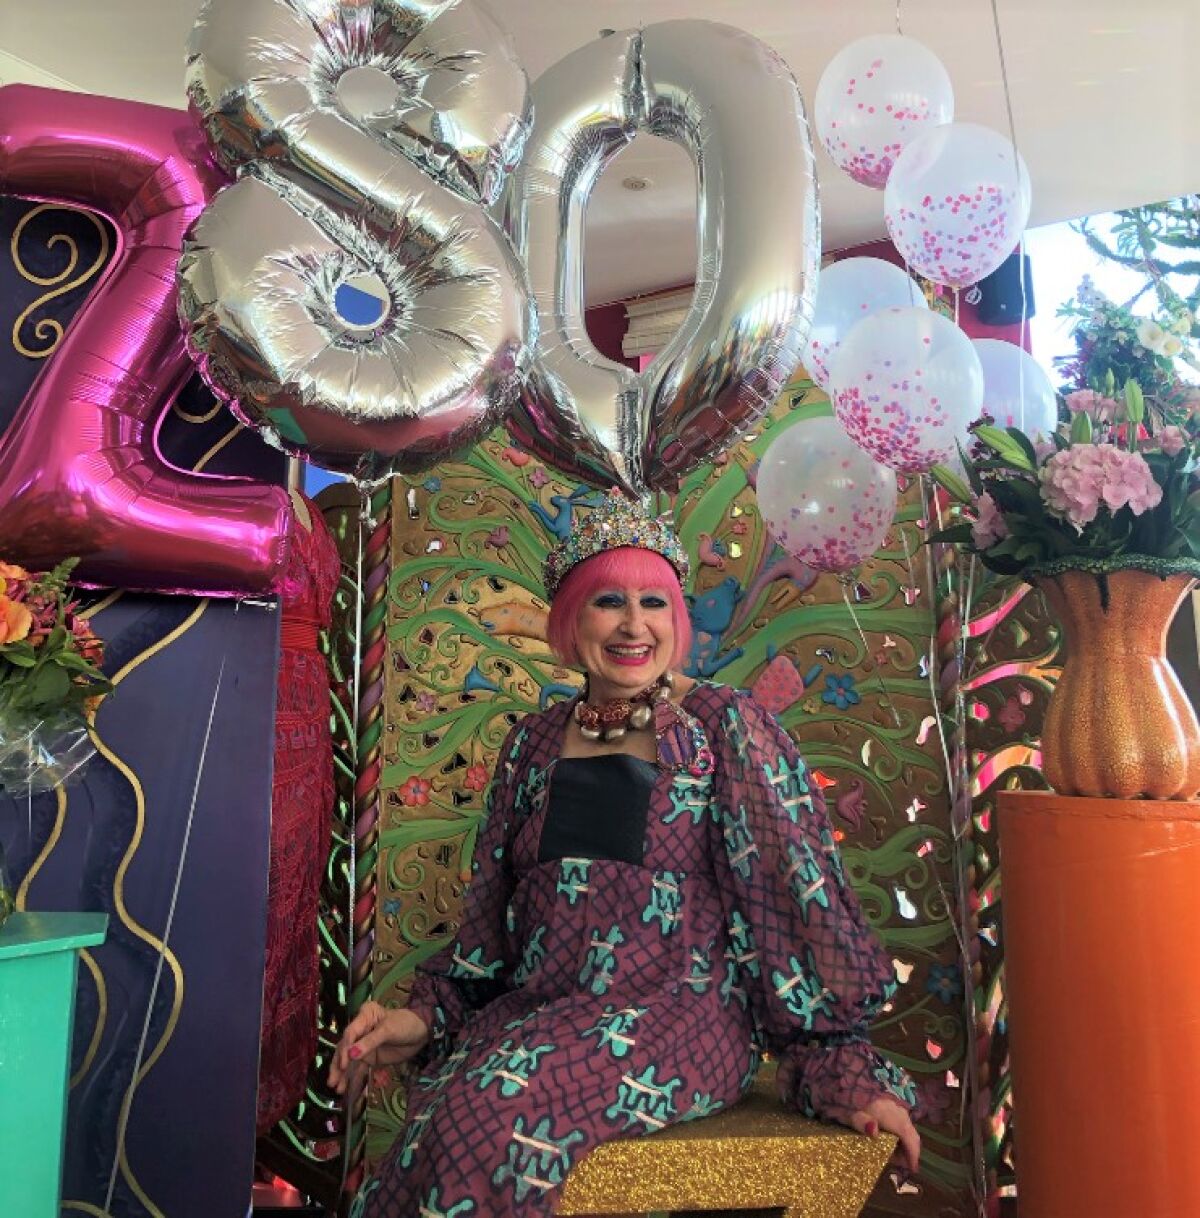 Dame Zandra Rhodes, fashion designer to royalty, turned 80 while sheltering in place in her London apartment.